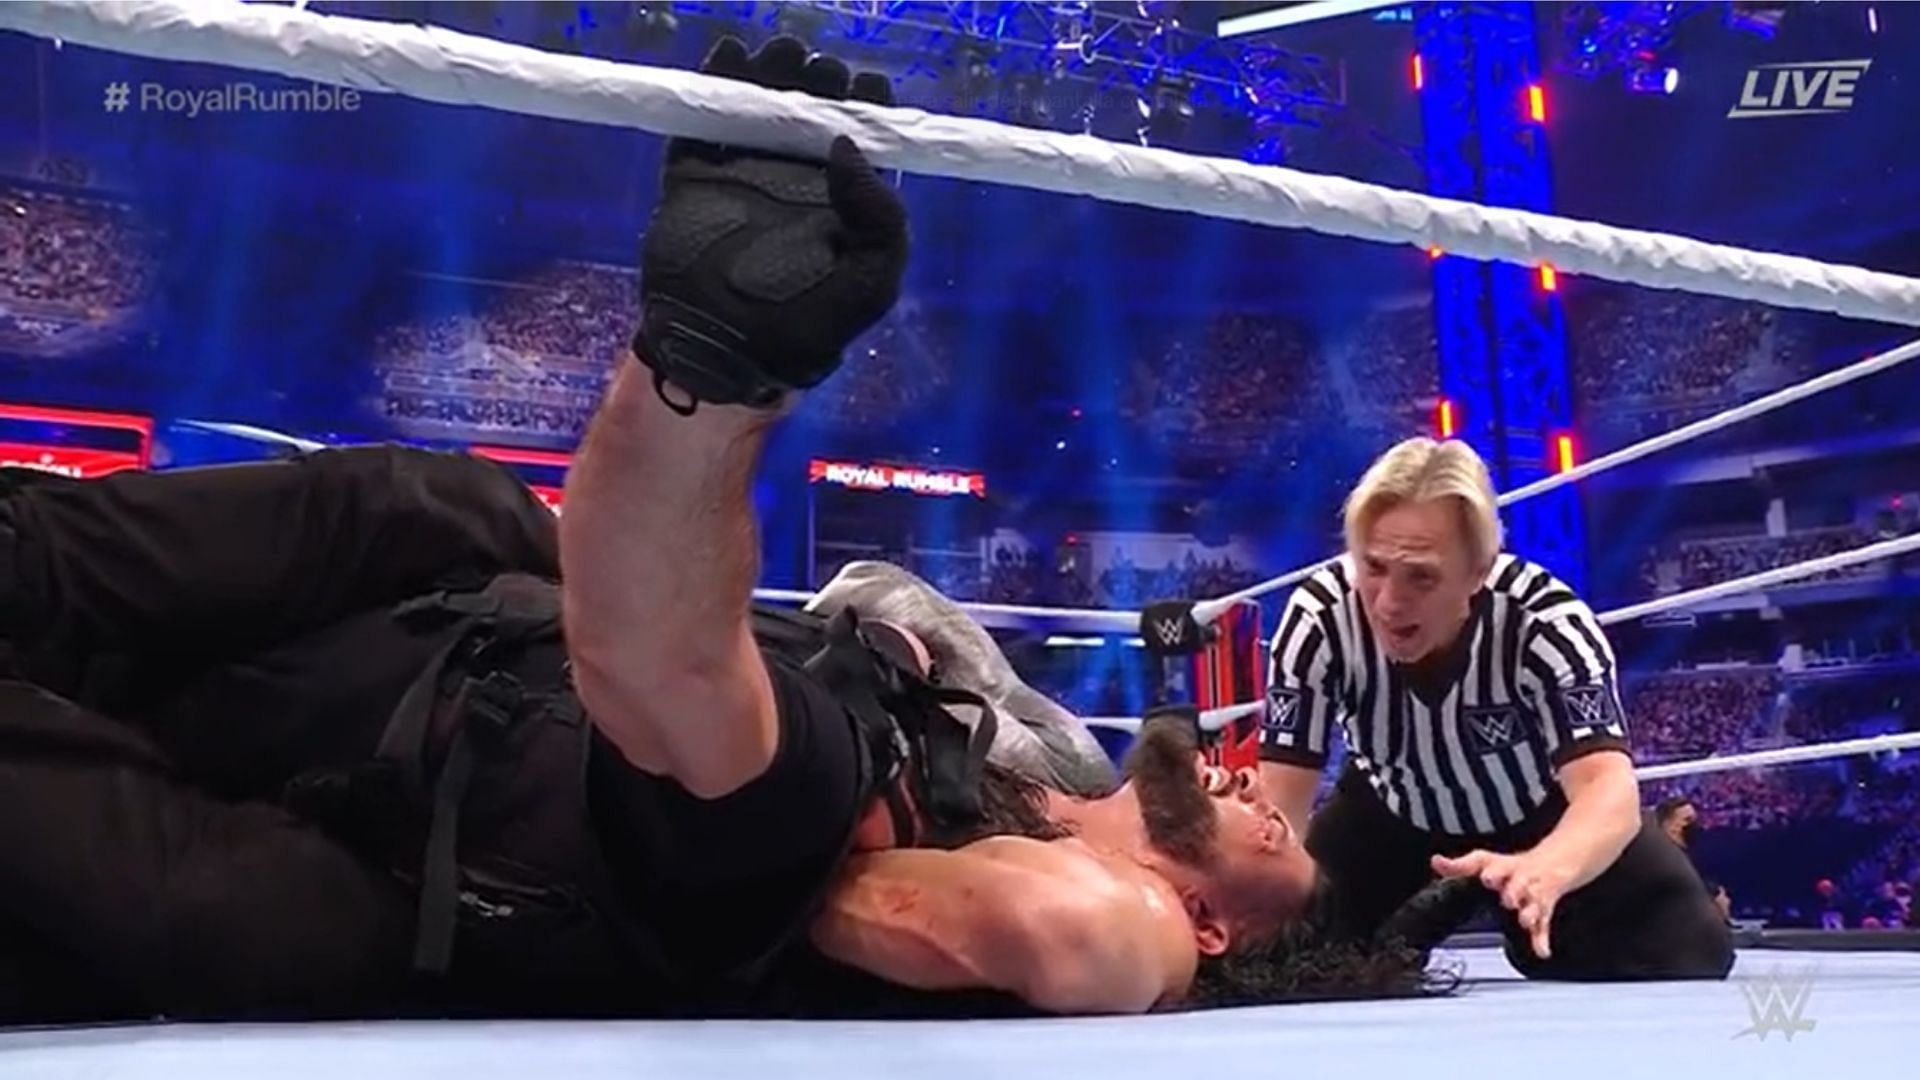 Seth Rollins defeated Roman Reigns by disqualification at Royal Rumble this year